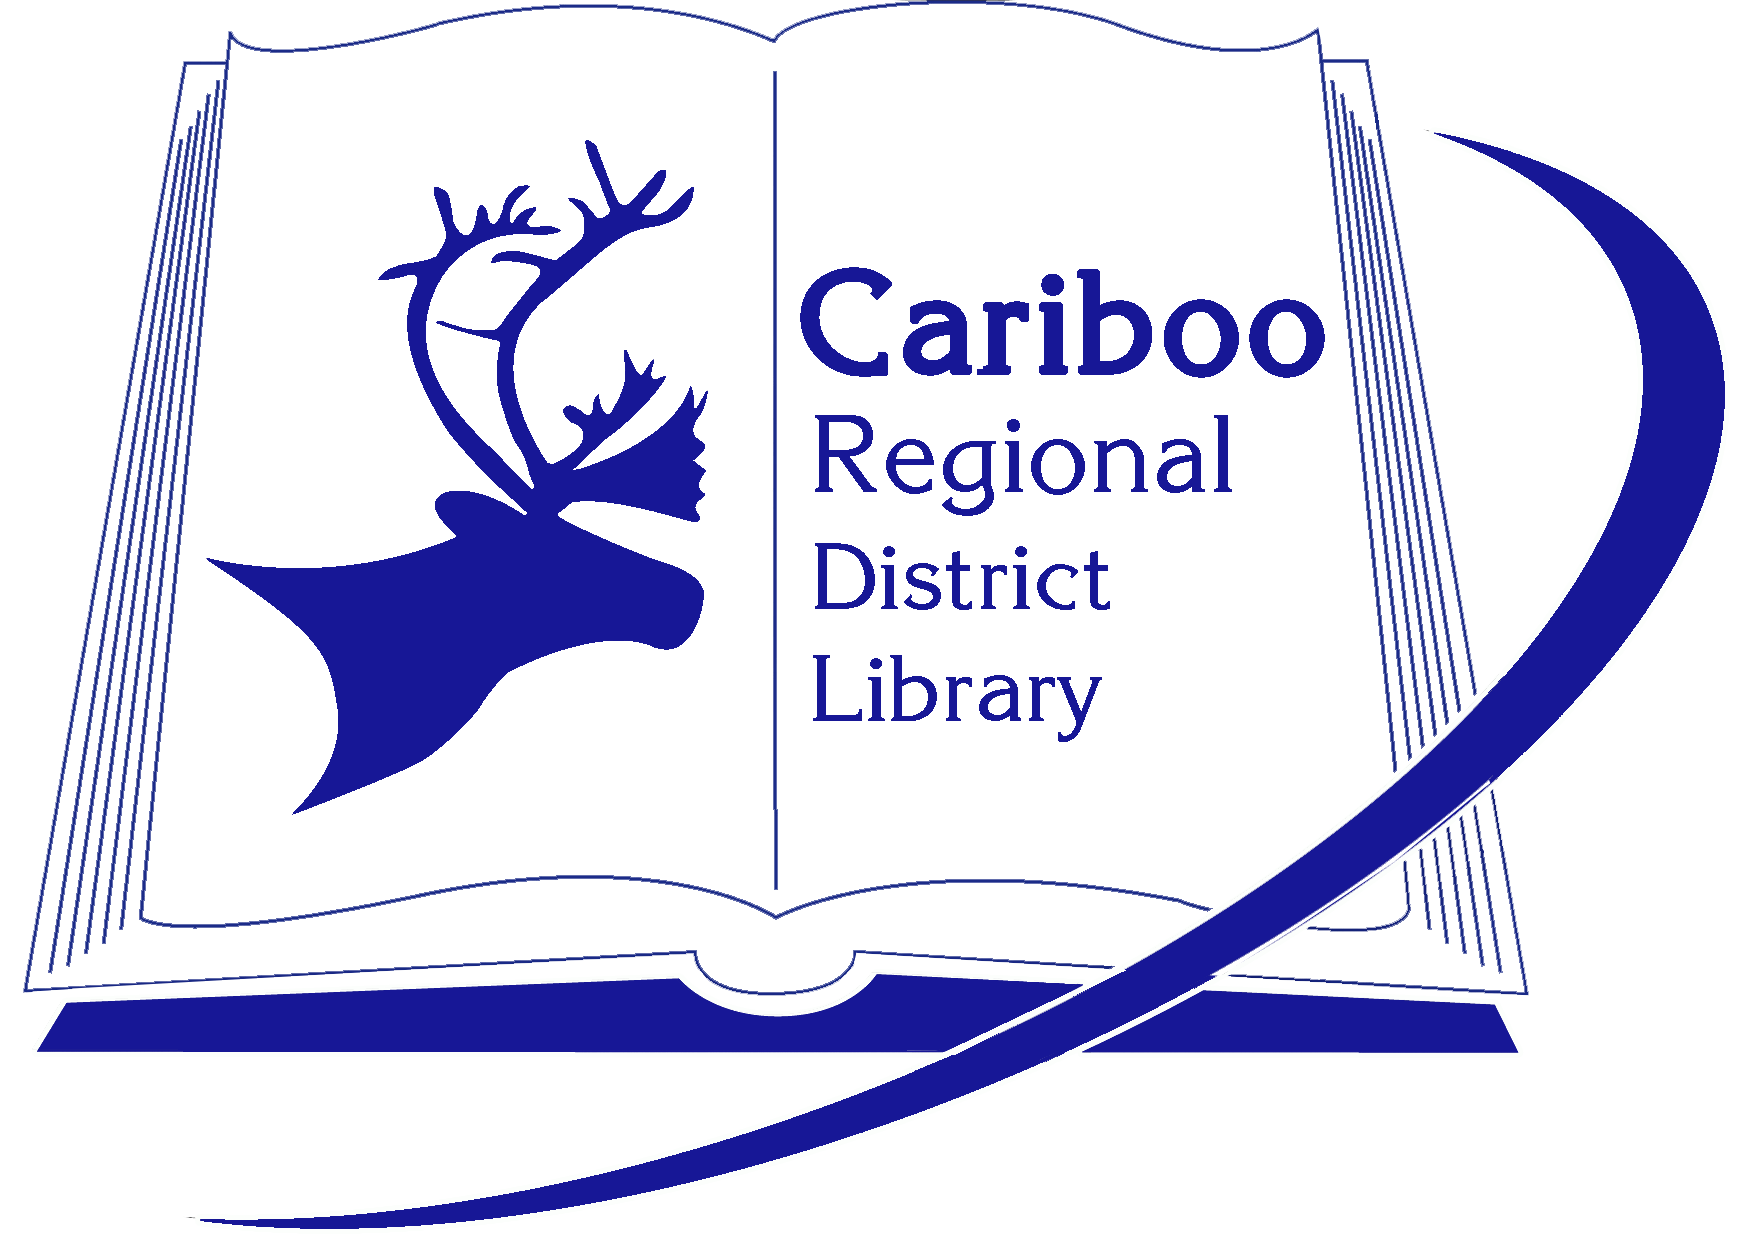 Cariboo Regional District Library